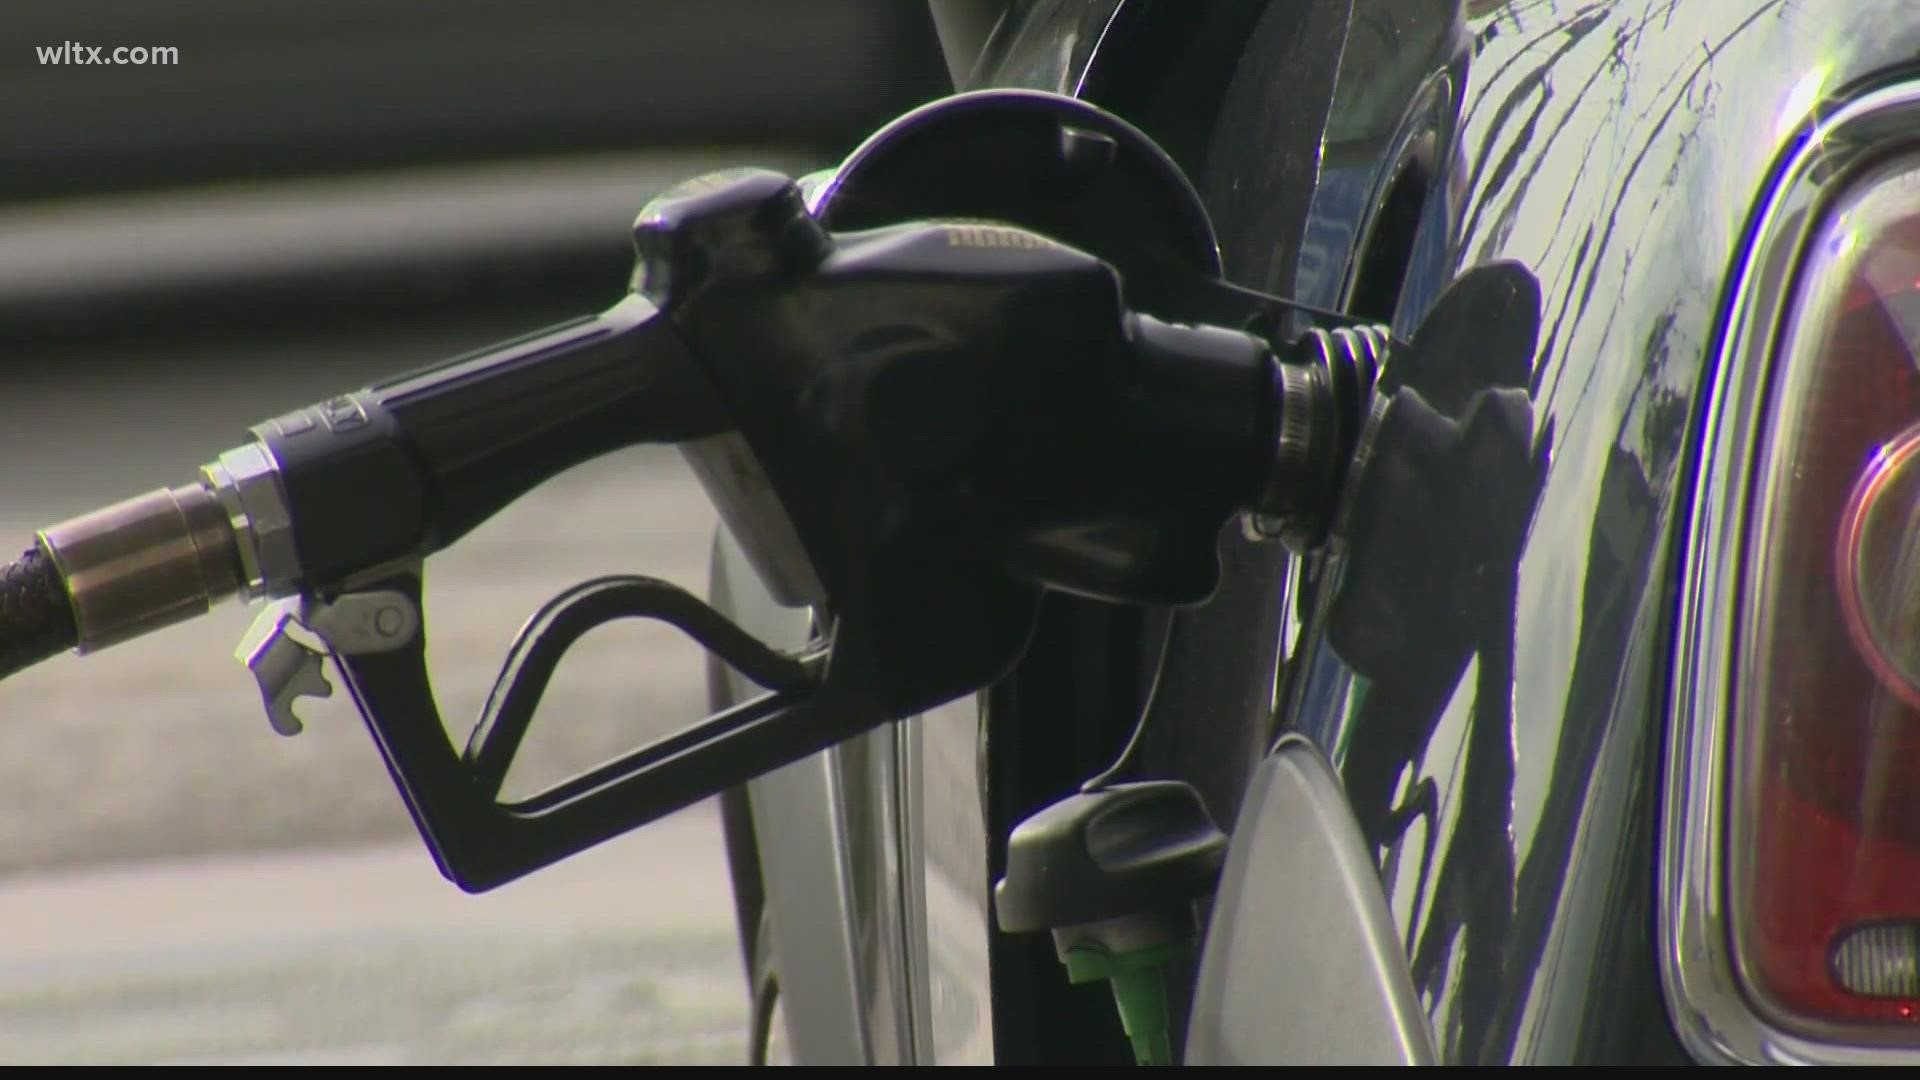 KENS 5's Jeremy Baker goes to an expert economist to find out how much relief Texans can expect at the pump.